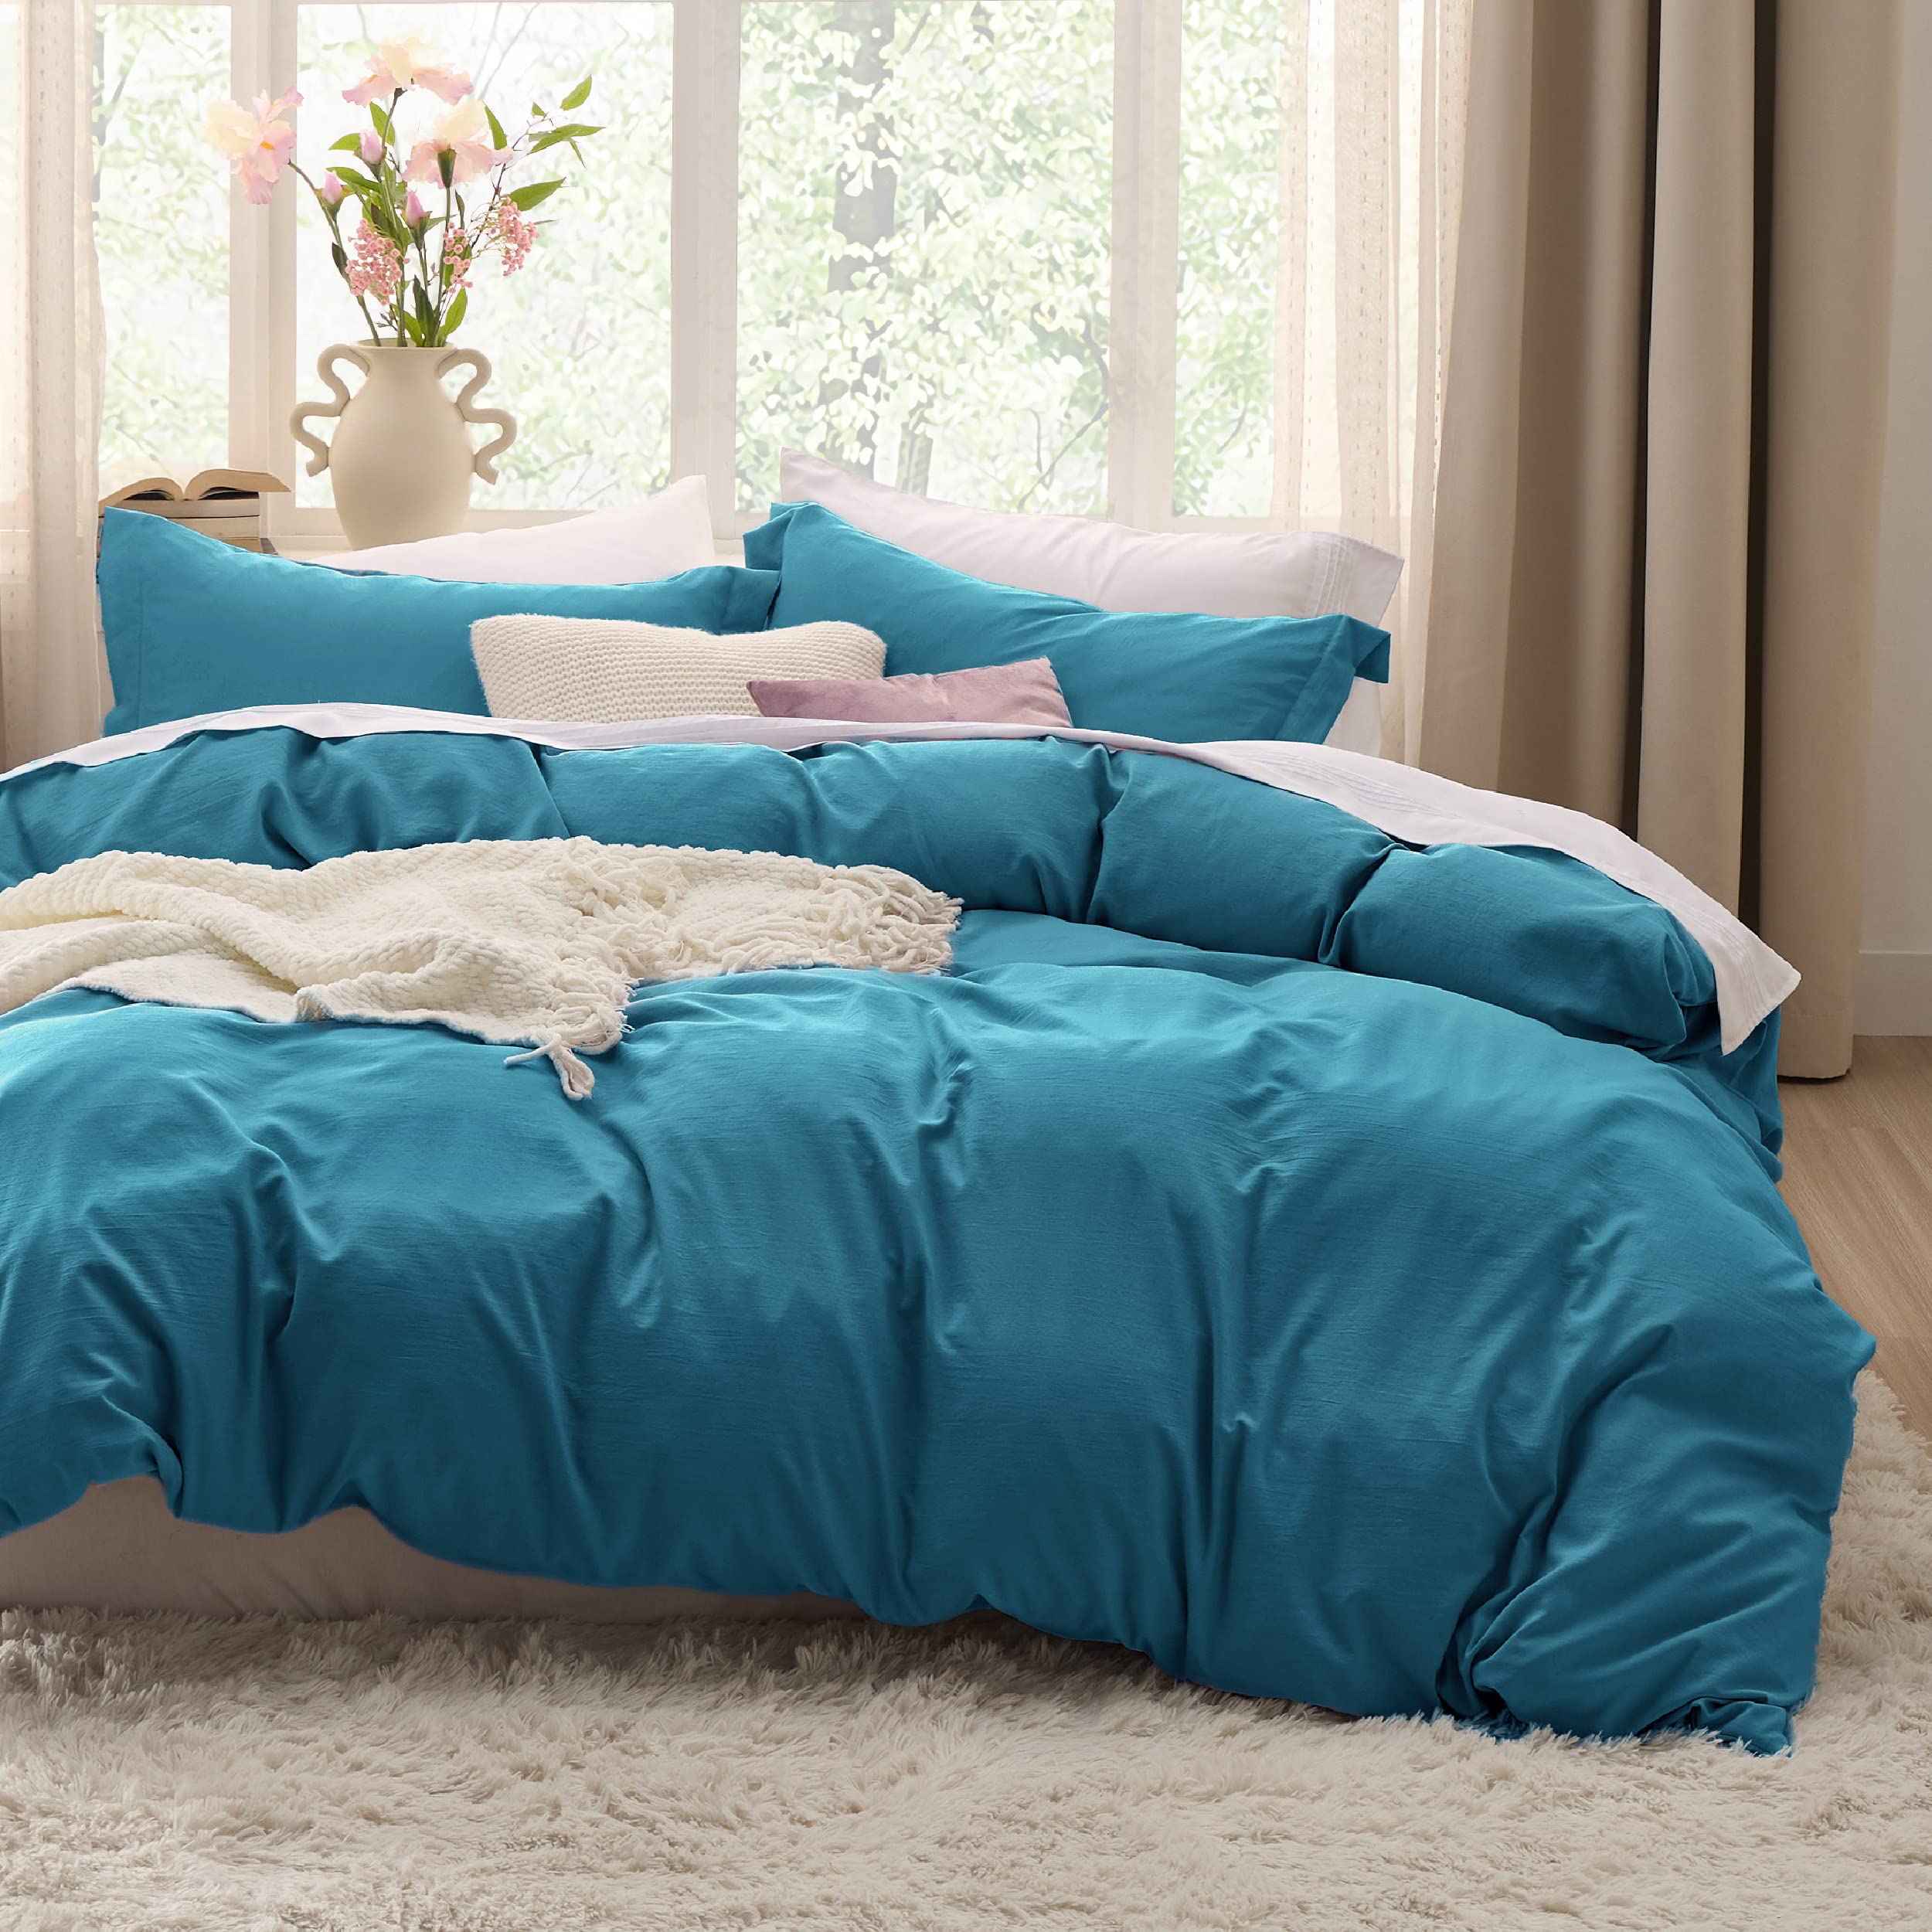 Book Cover Bedsure Teal Duvet Cover Queen Size - Soft Prewashed Queen Duvet Cover Set, 3 Pieces, 1 Duvet Cover 90x90 Inches with Zipper Closure and 2 Pillow Shams, Comforter Not Included Teal (No Comforter) Queen (90